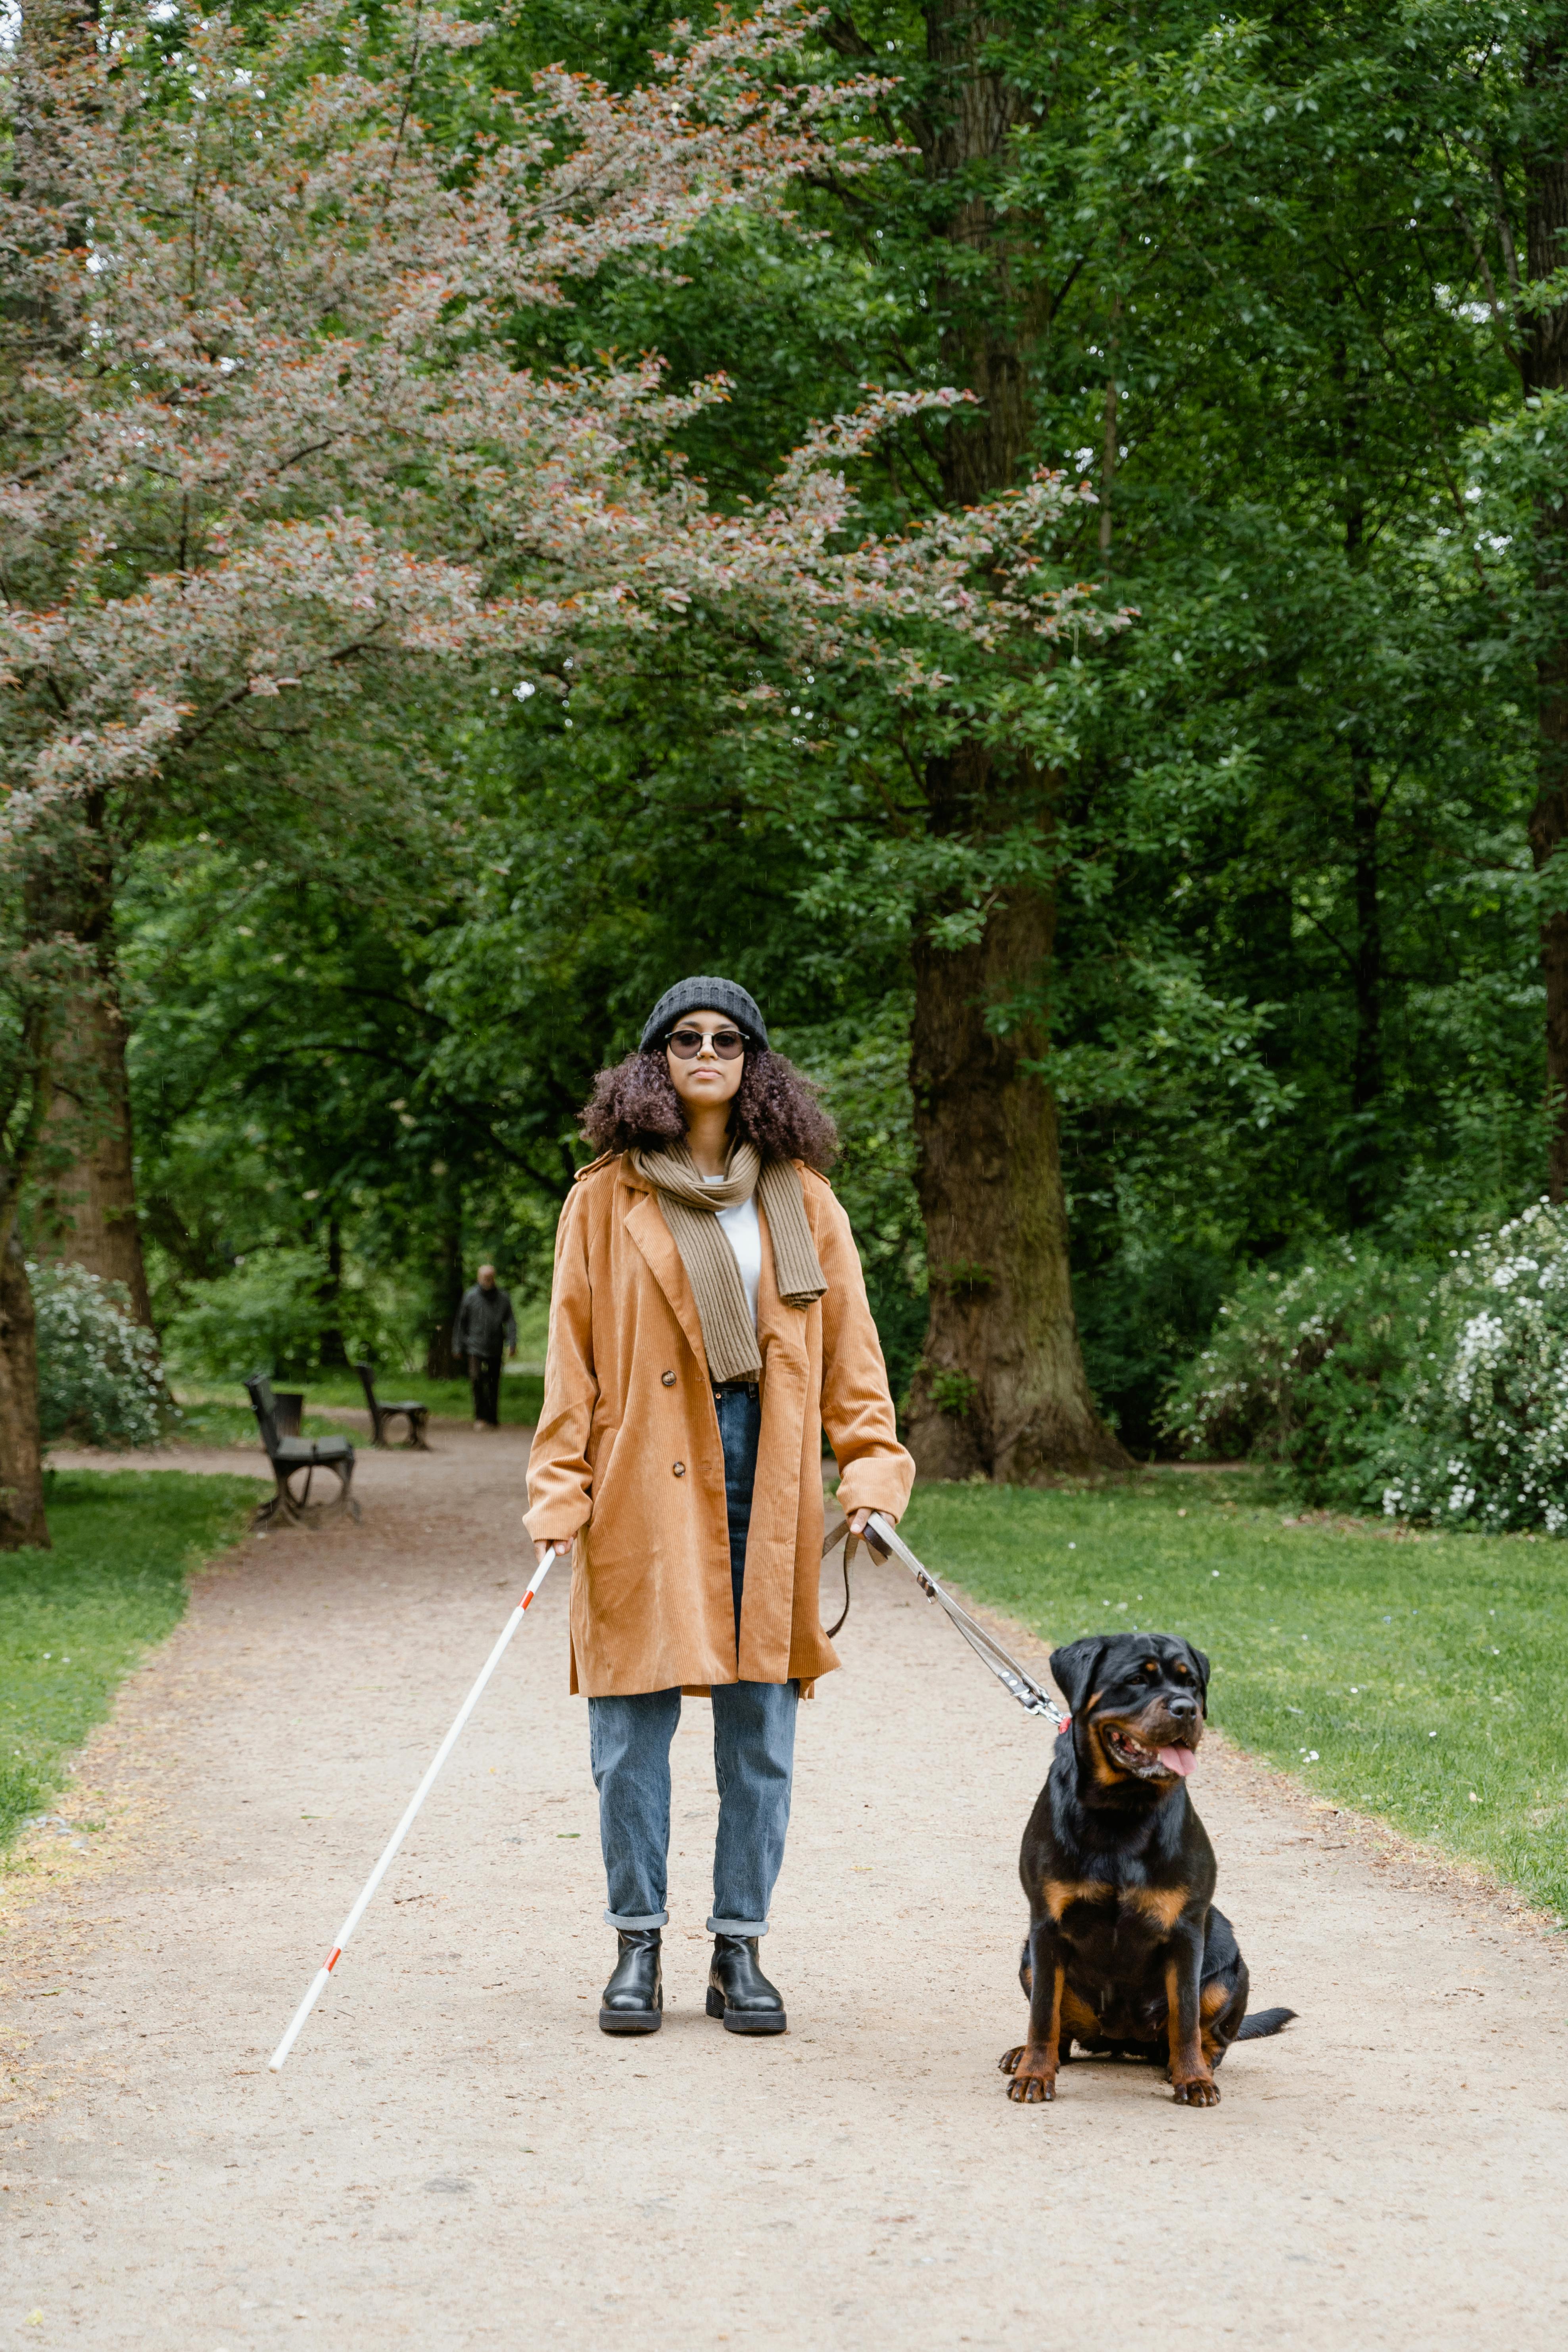 A blind woman with a Rottweiler | Source: Pexels